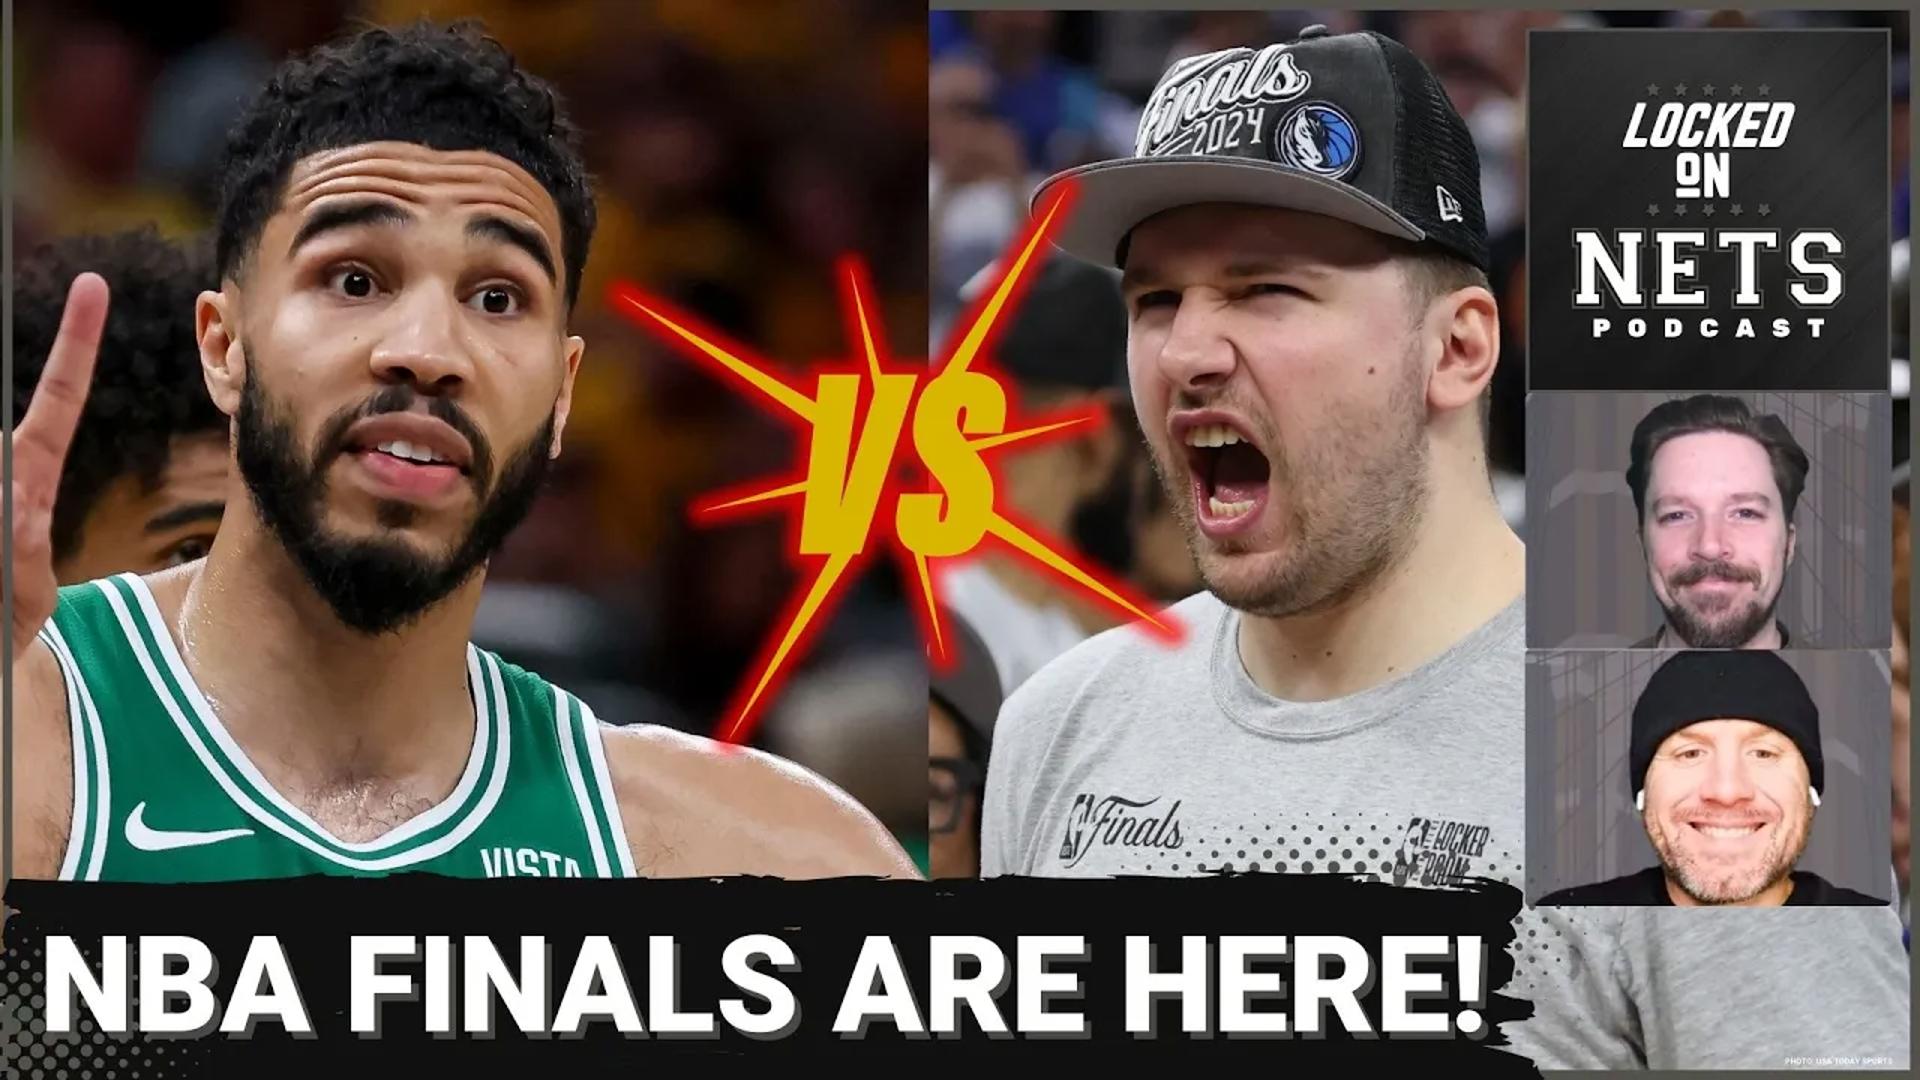 The NBA Finals start tonight between the Boston Celtics and Dallas Mavericks, led by Jayson Tatum and Luka Doncic respectively.